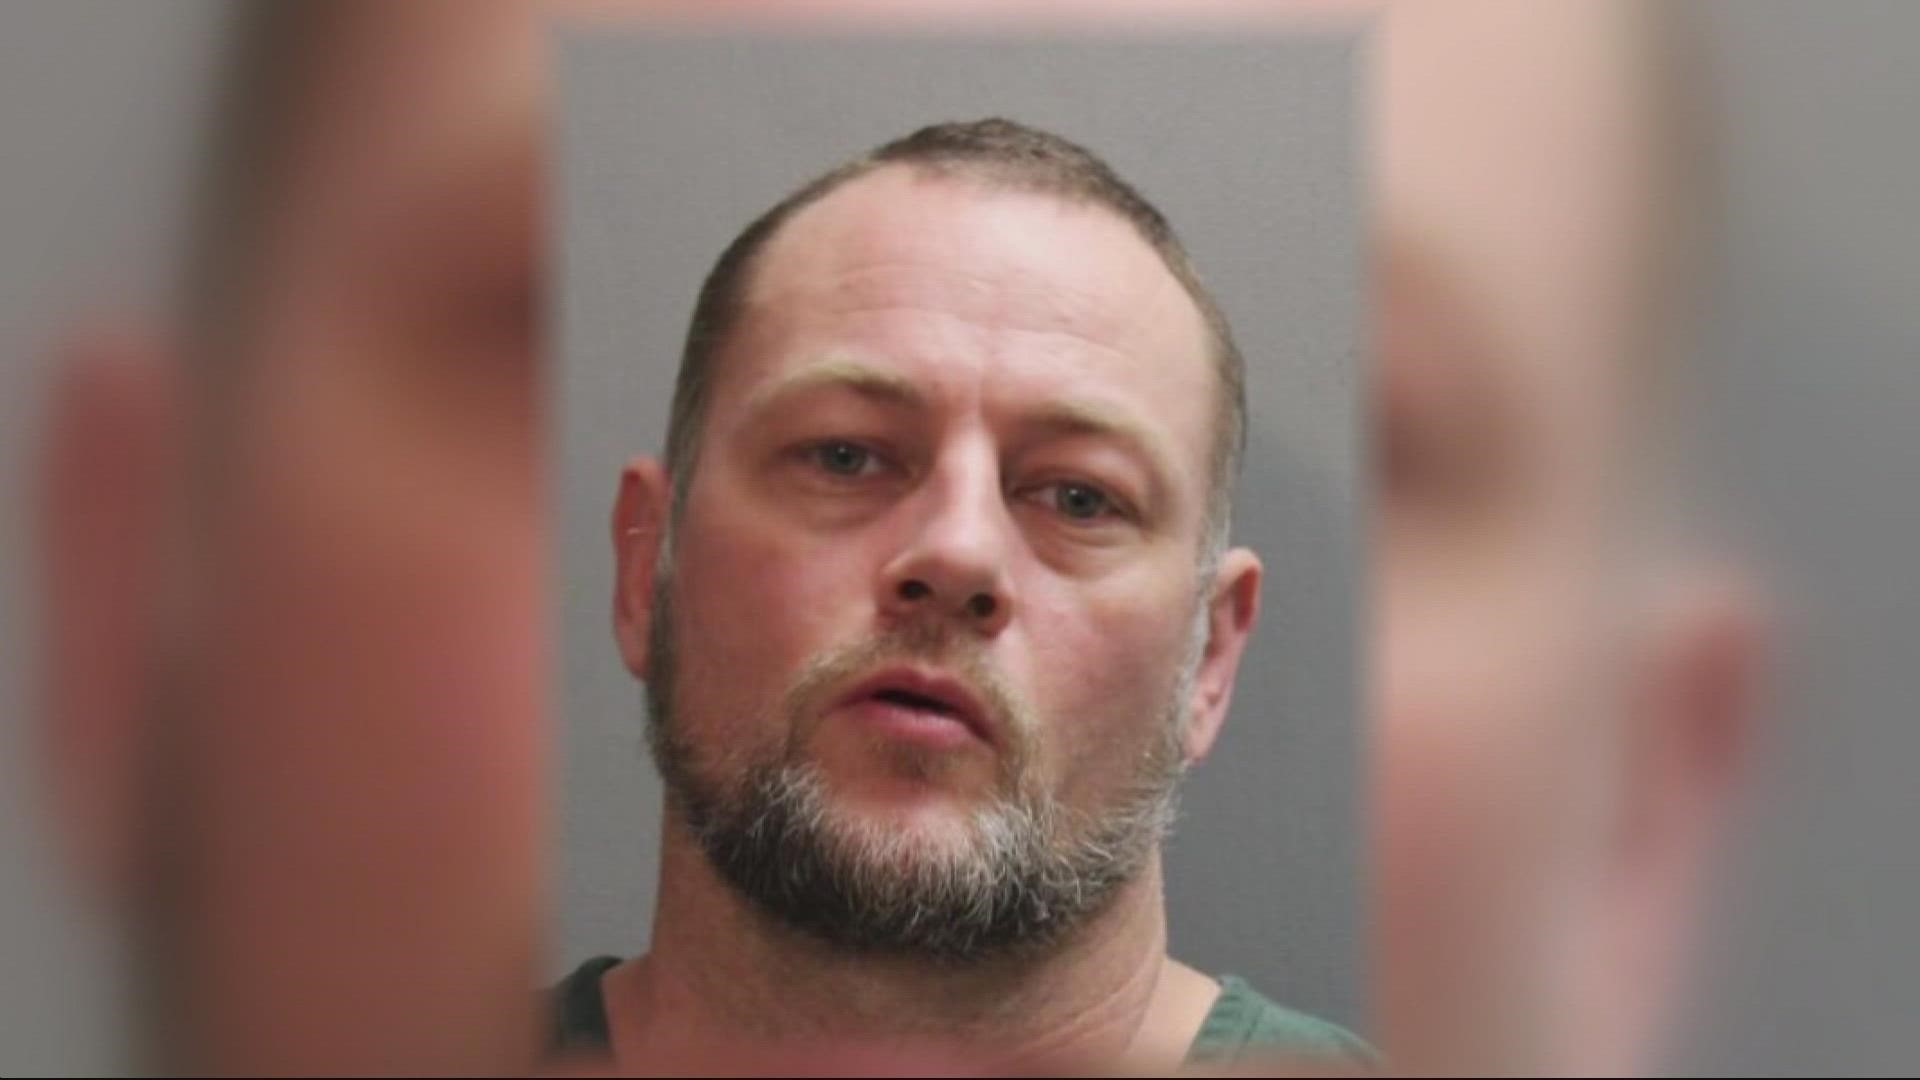 Eric S. Lackey, 44, was arrested on murder charges after police found a dead body. During his arrest, he pointed a gun at officers and was shot, police said.